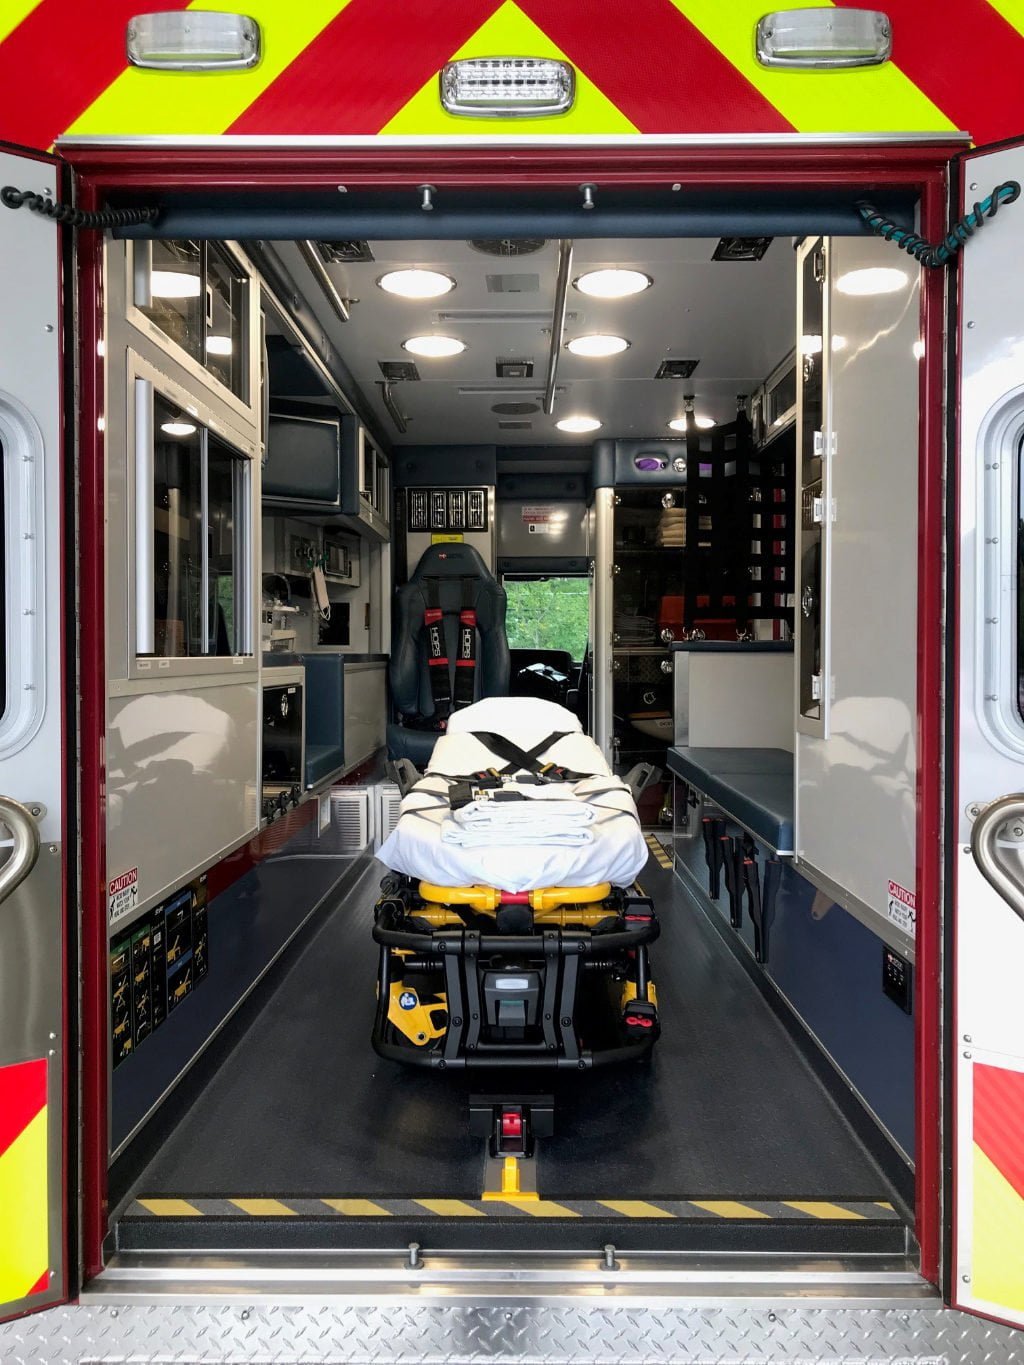 The North Andover ambulance has a Stryker PowerLOAD® fastening system, and a Stryker Power-PRO® XT cot in its walk-through chassis and box.